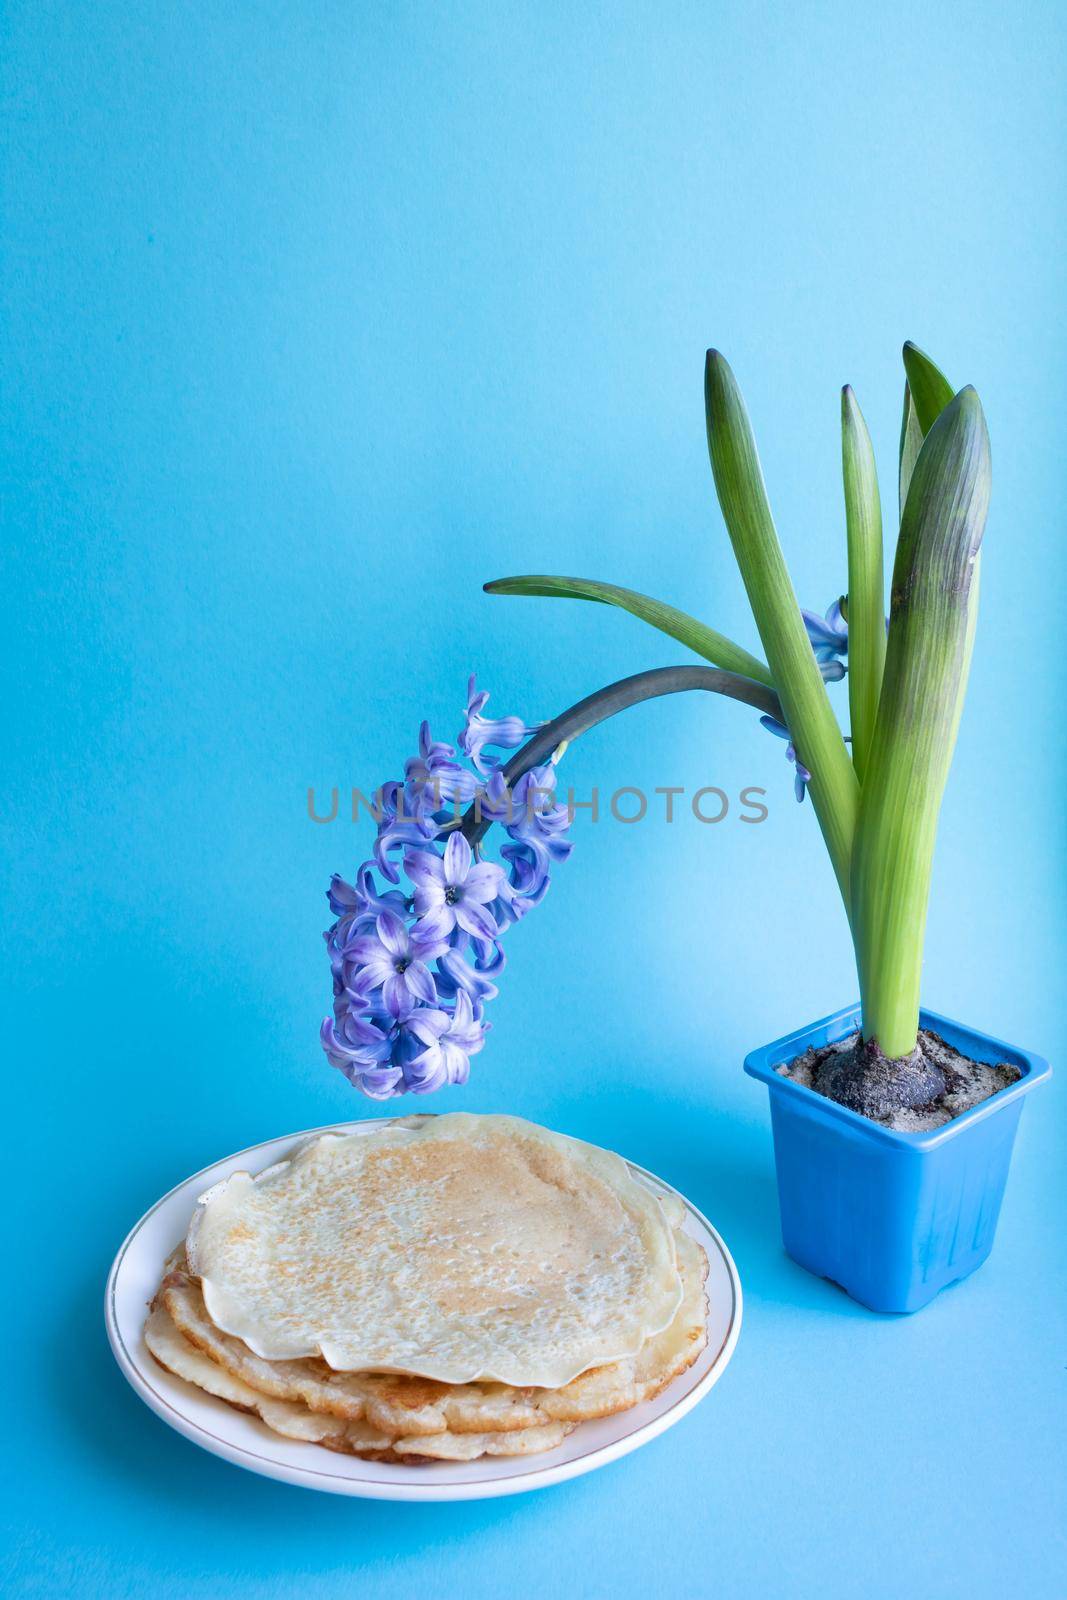 On a blue background, a lilac hyacinth flower in a pot, next to a plate of pancakes